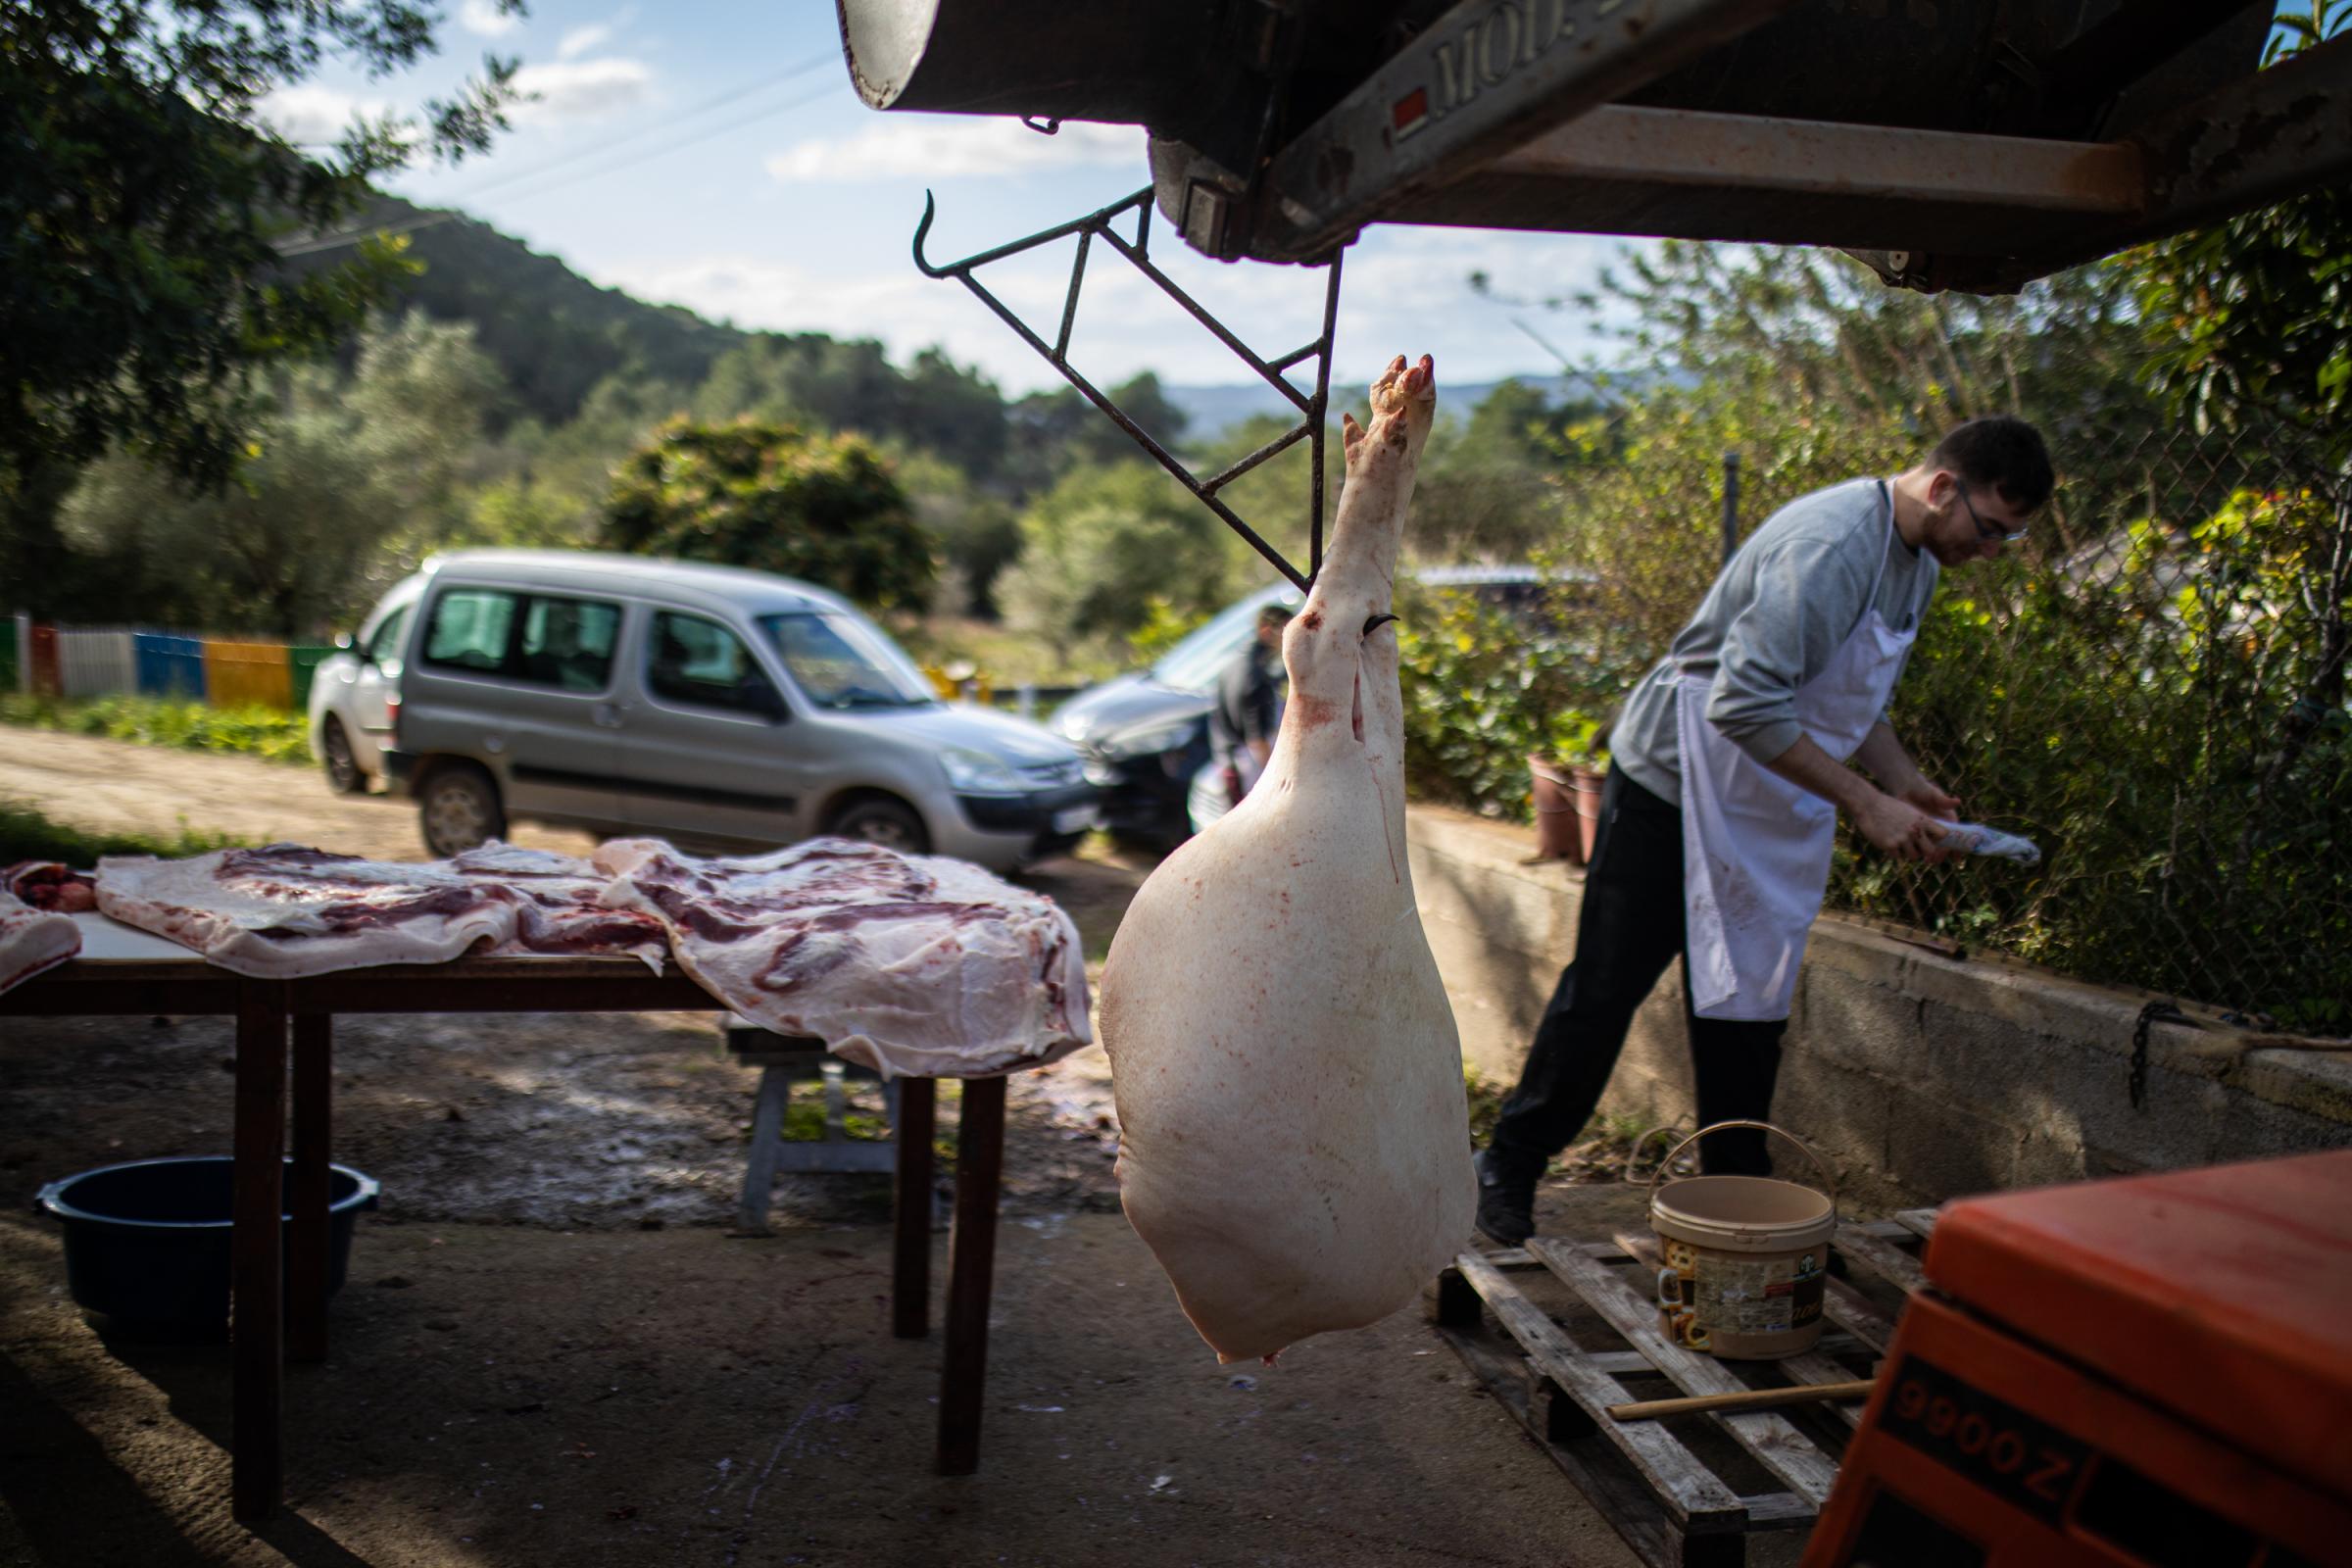 Spain's Sustainable Swine Slaughtering For Prized Iberian  - IBIZA, SPAIN - DECEMBER 06: While the pig hangs up on the...